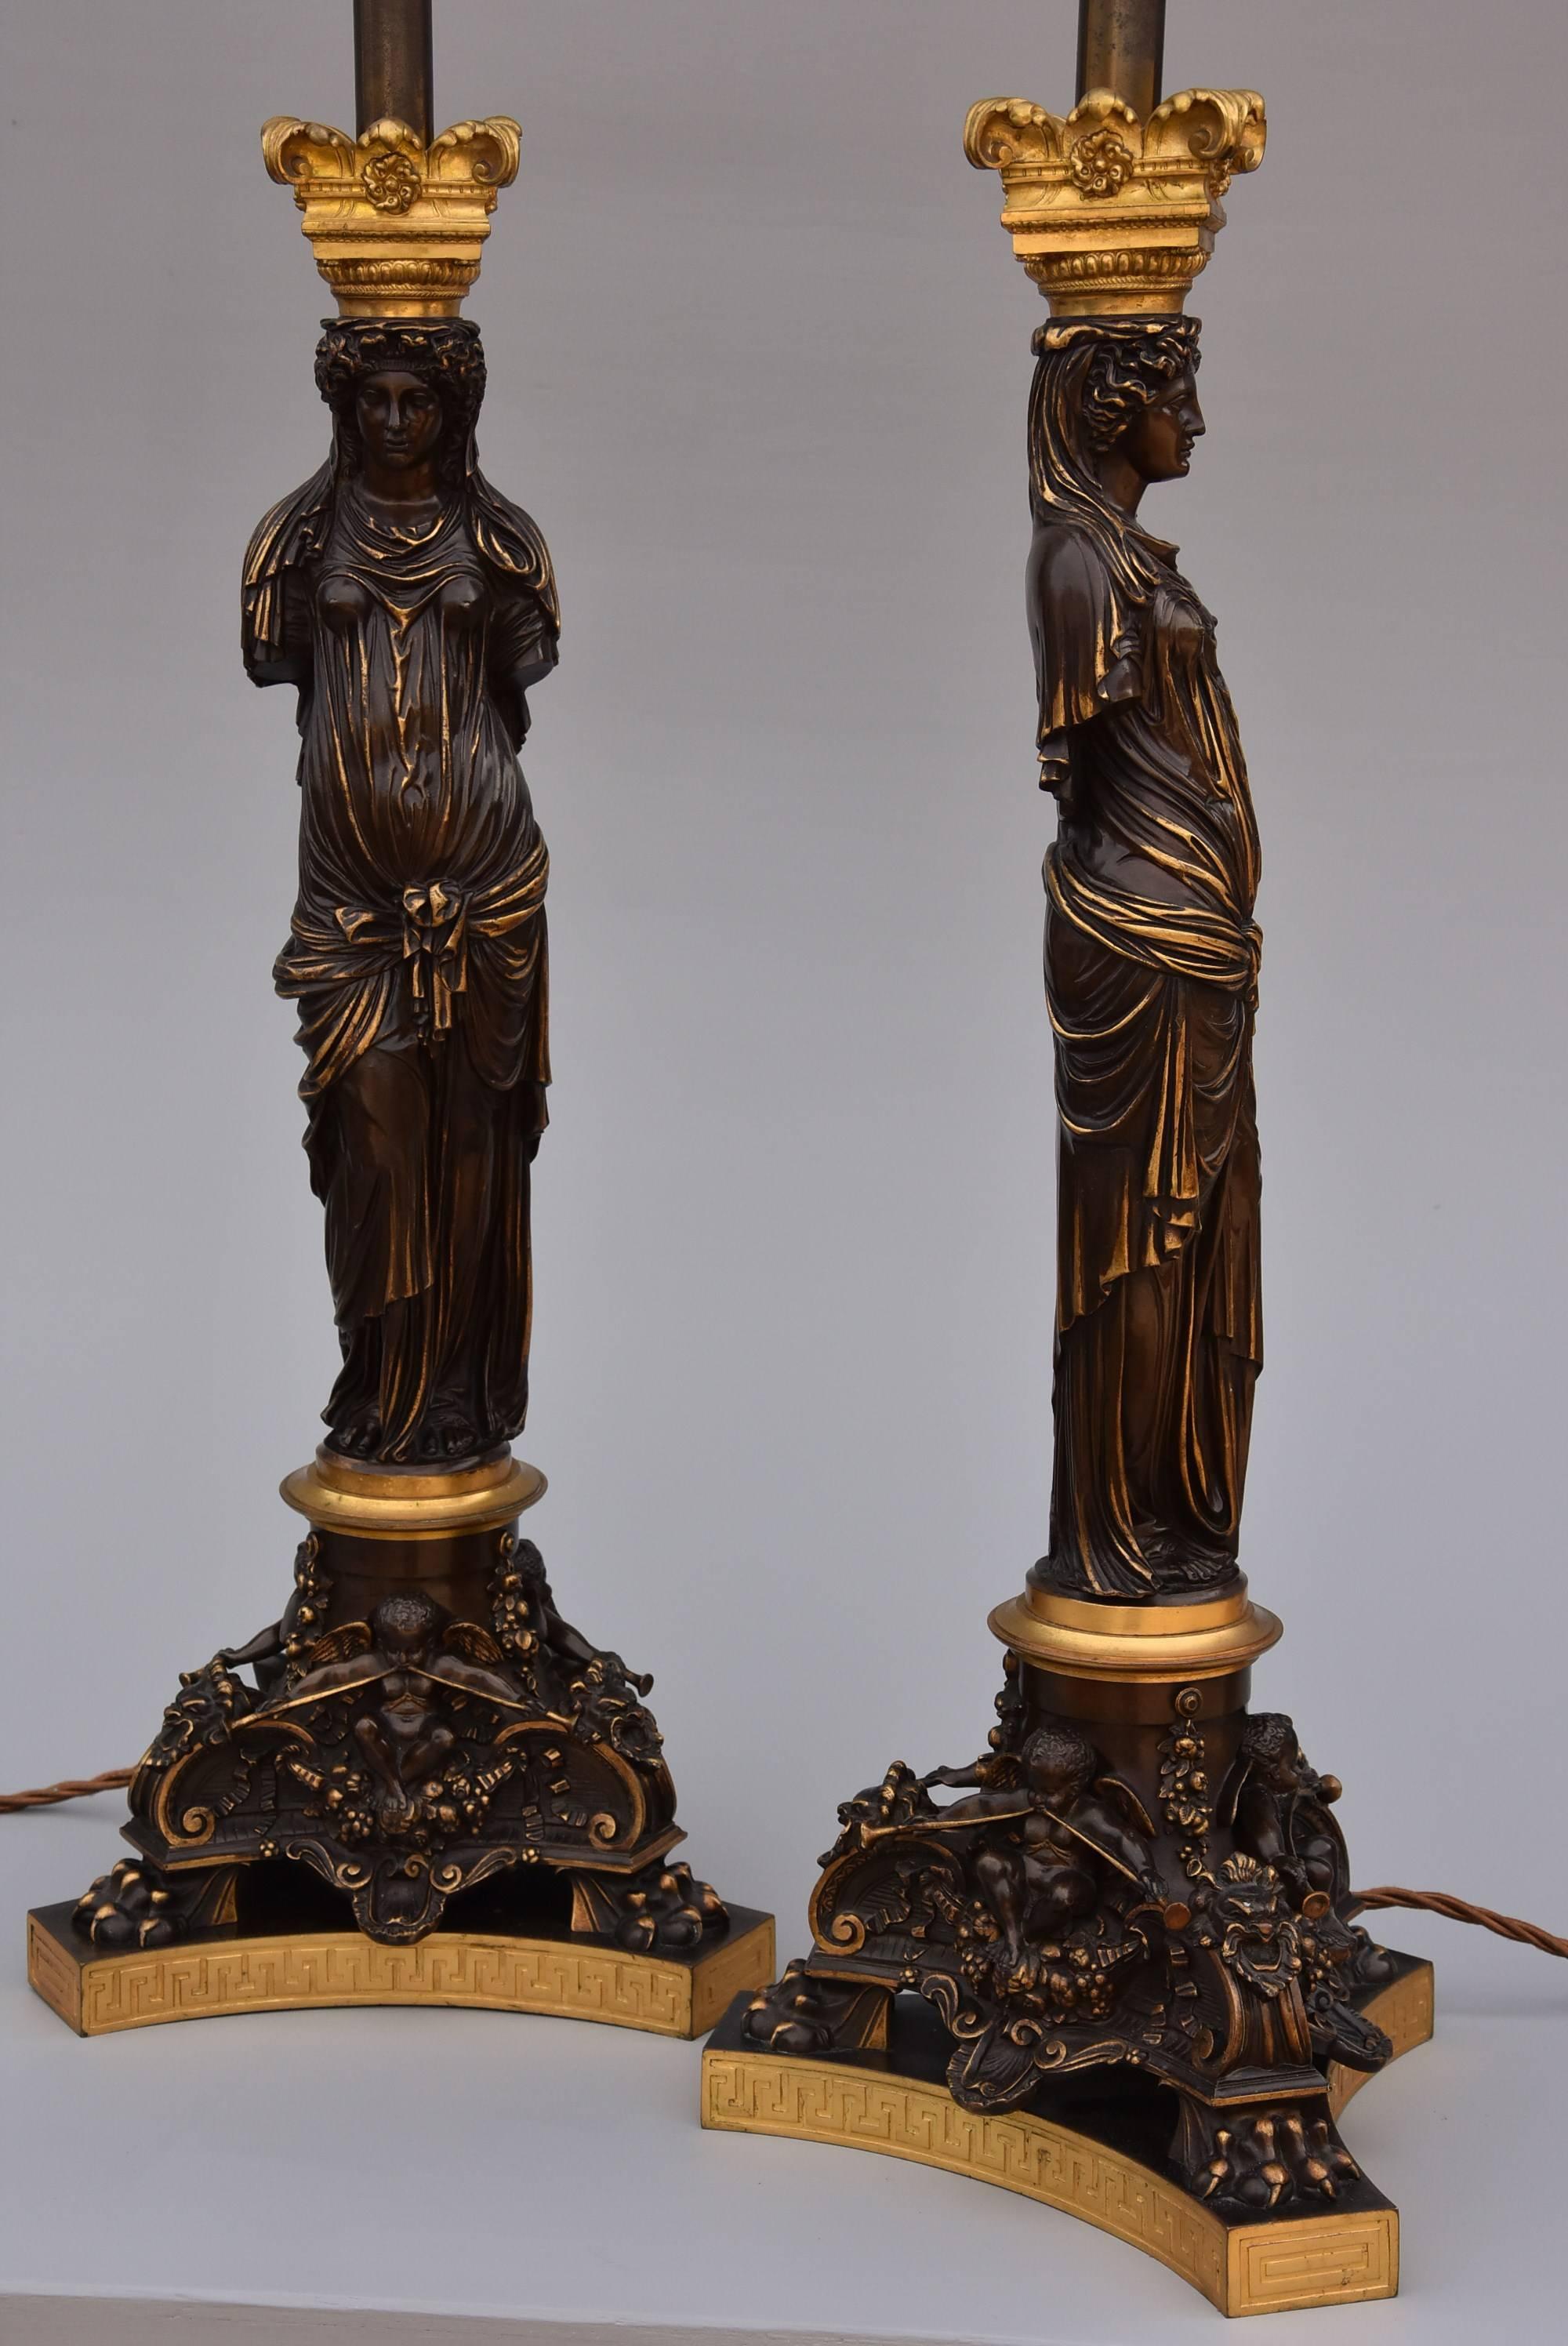 A large pair of late 19th century superb quality bronze and gilt bronze table lamps, signed Barbedienne.

This pair of lamps are in the form of antique caryatids after a model of statues in ‘The Carytids Room’ in The Louvre, Paris.

The lamps